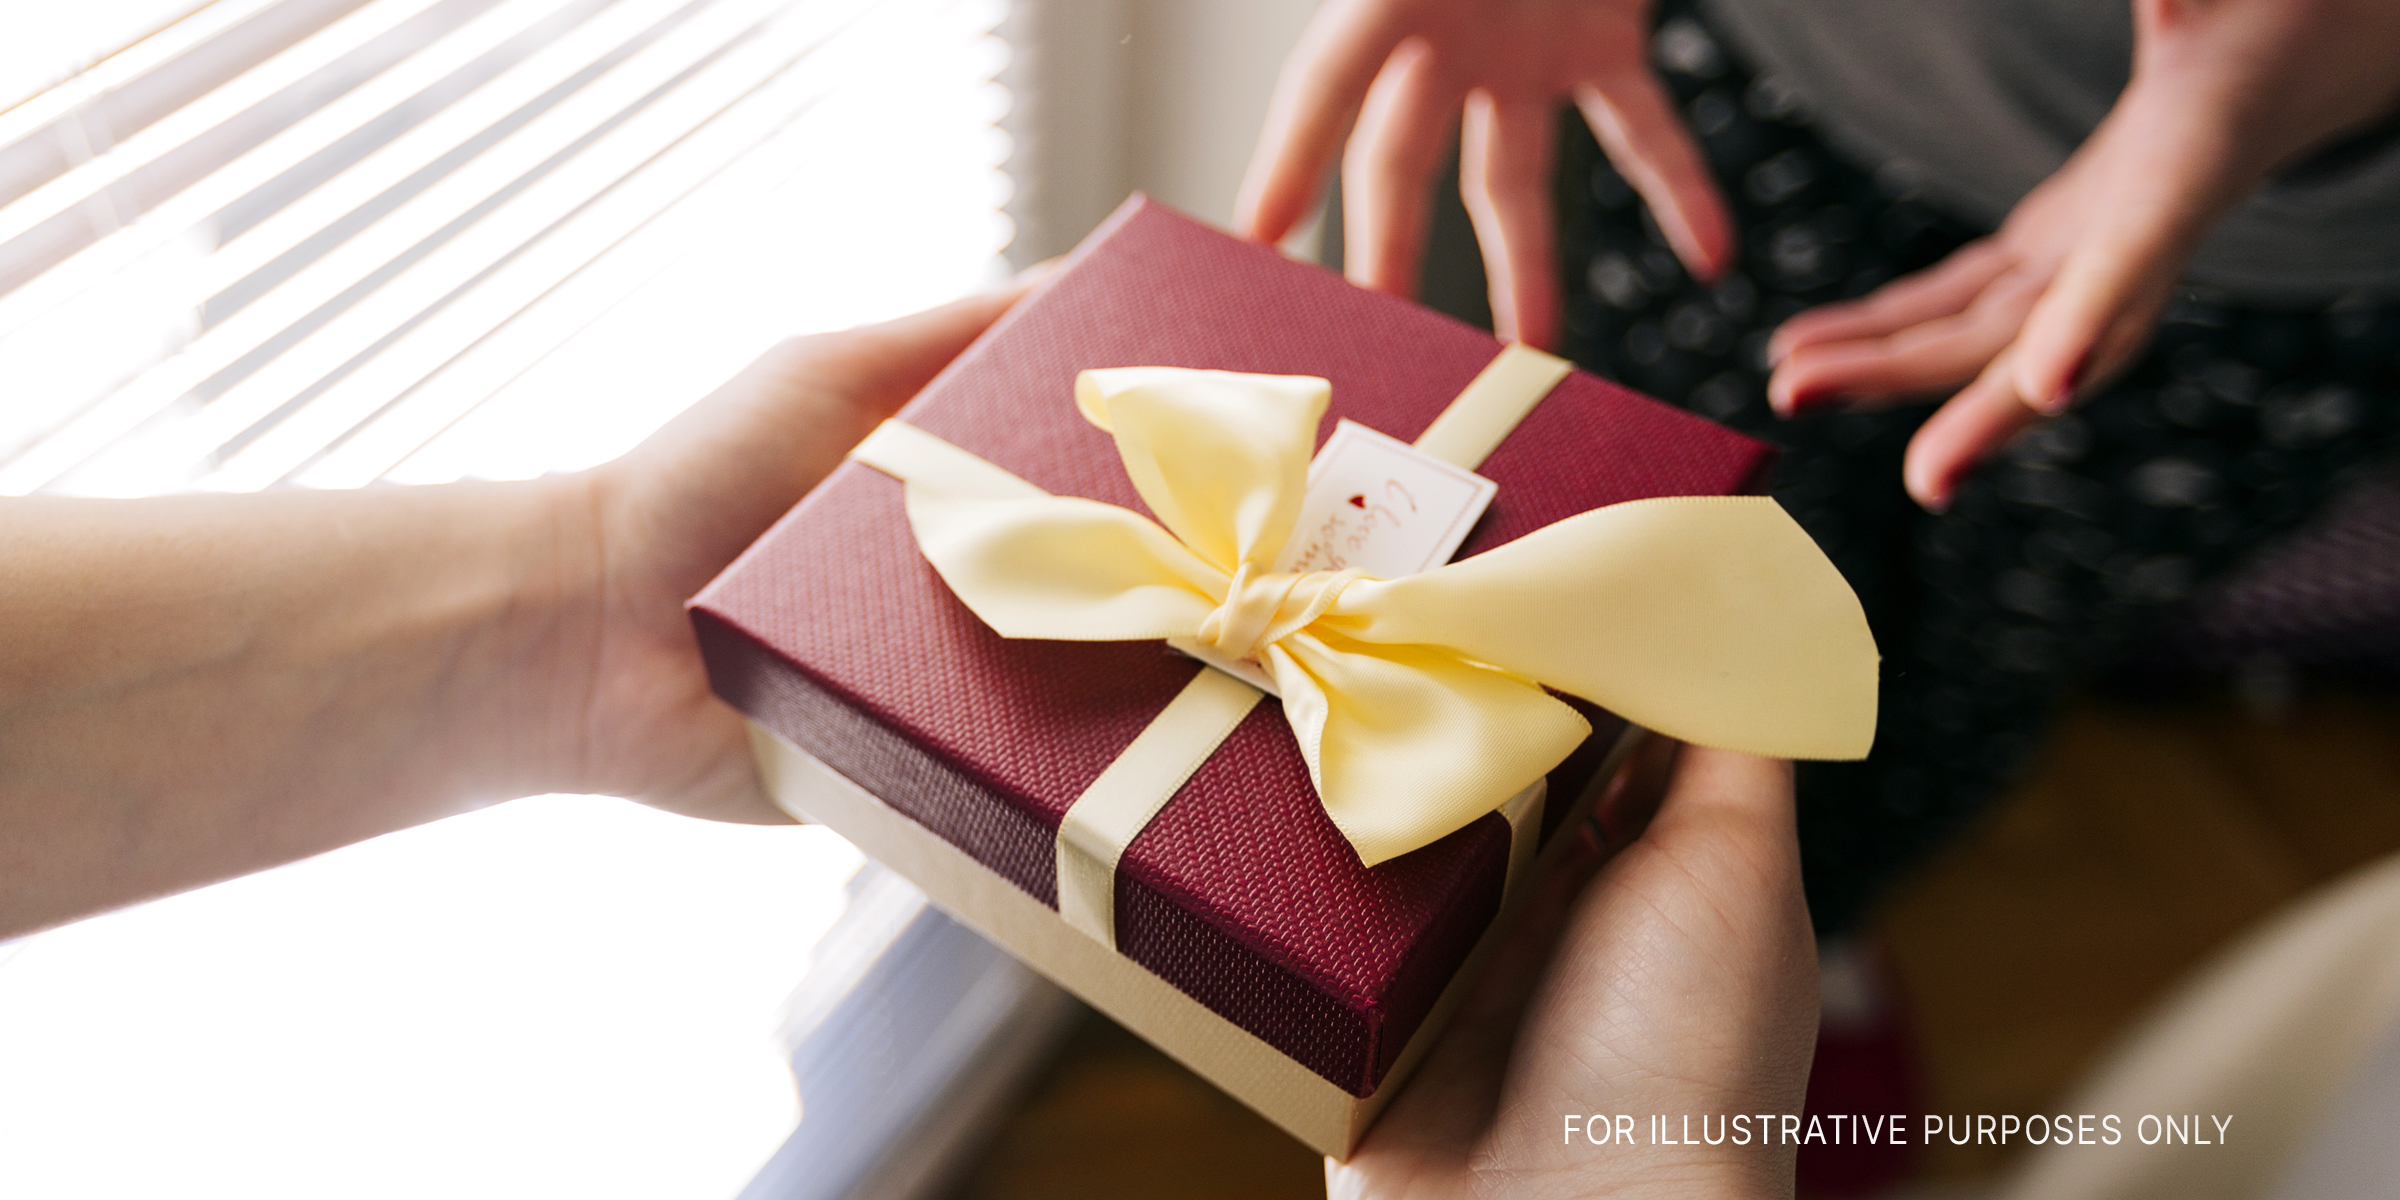 A man gifting a present to a woman | Source: Shutterstock